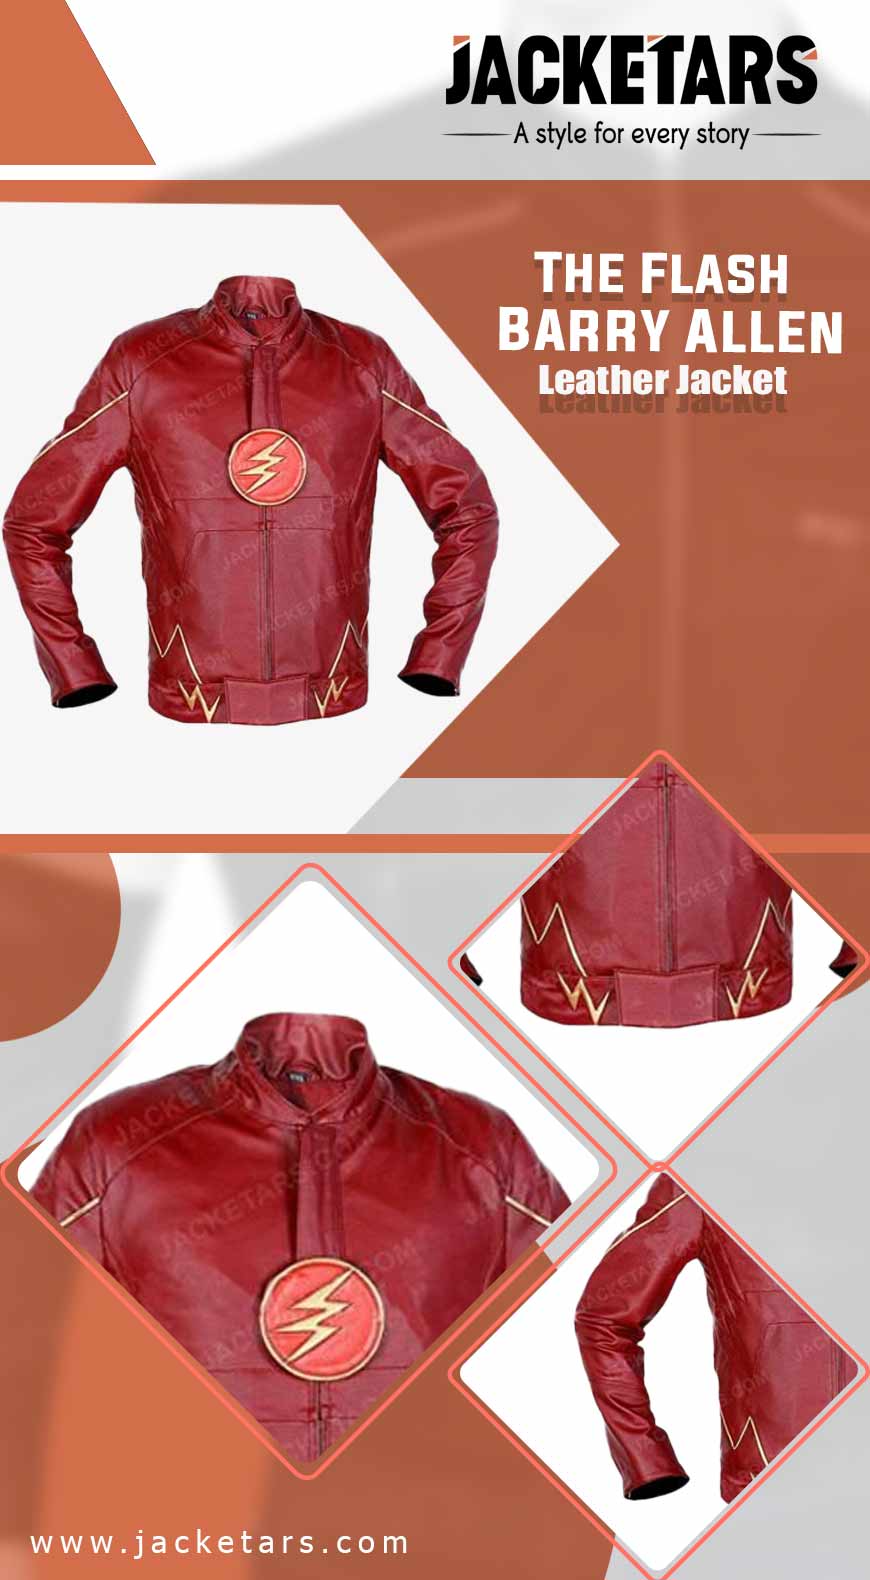 The Flash Barry Allen Leather Jacket INFO